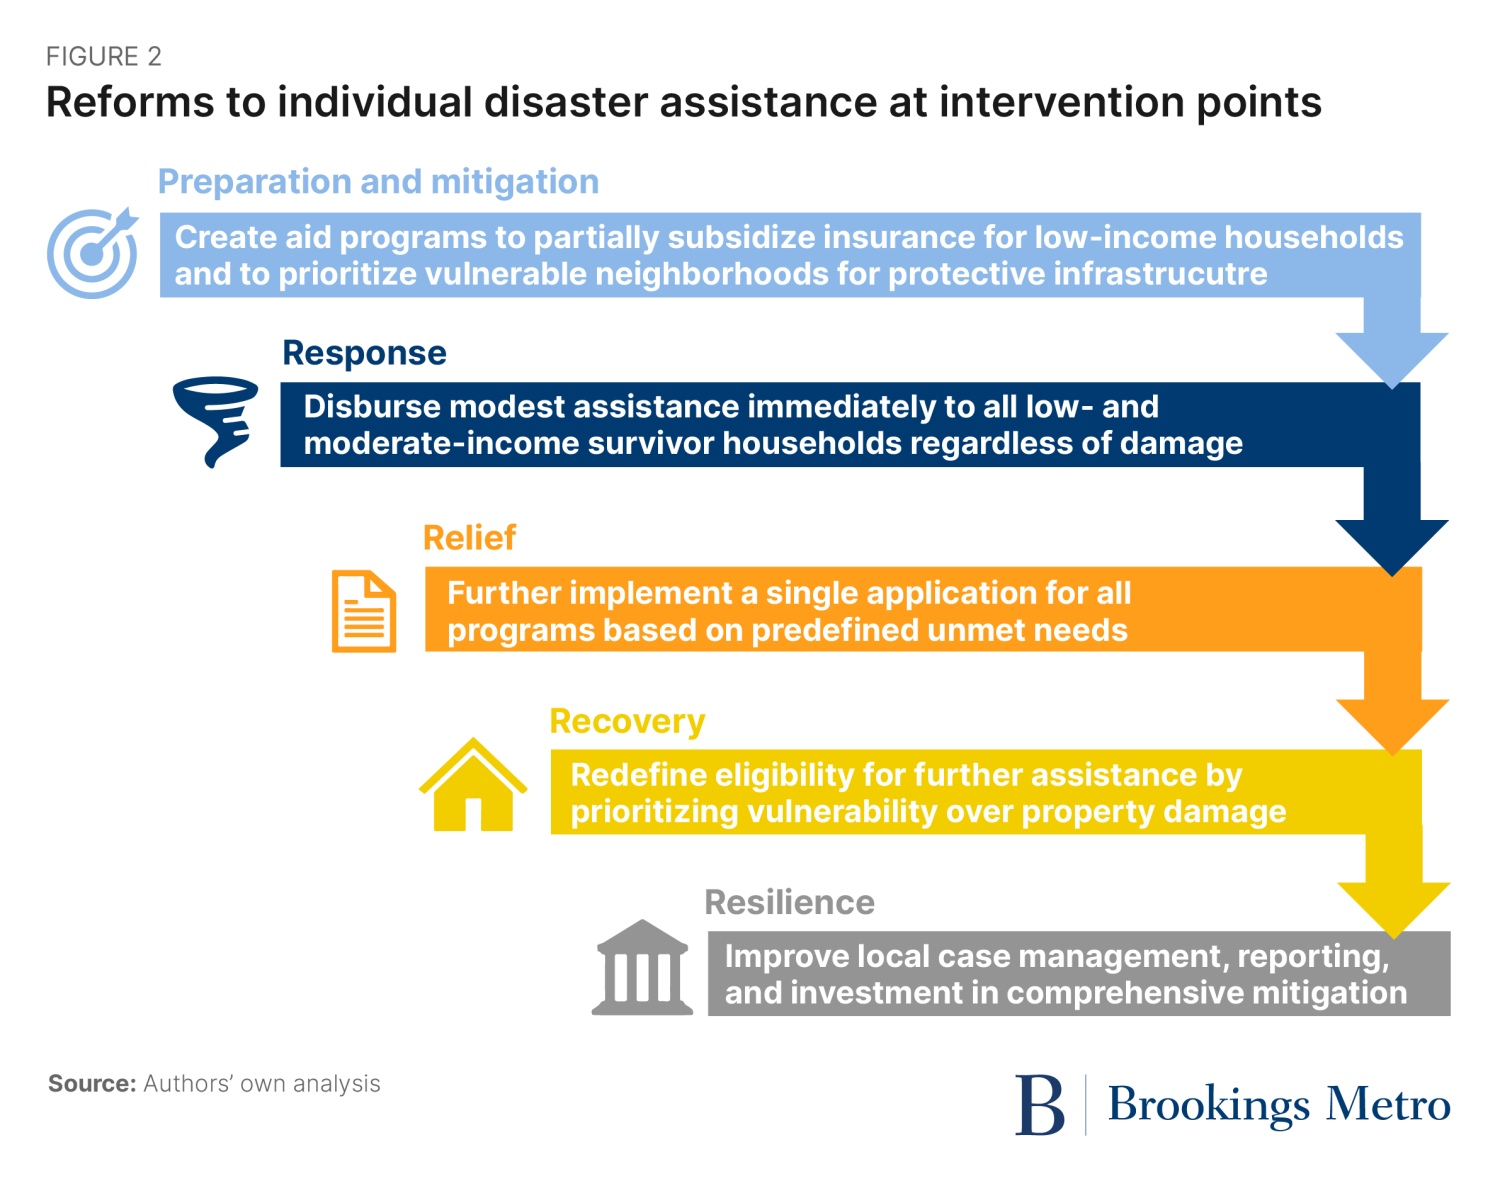 Figure 2. Reforms to individual disaster assistance at intervention points